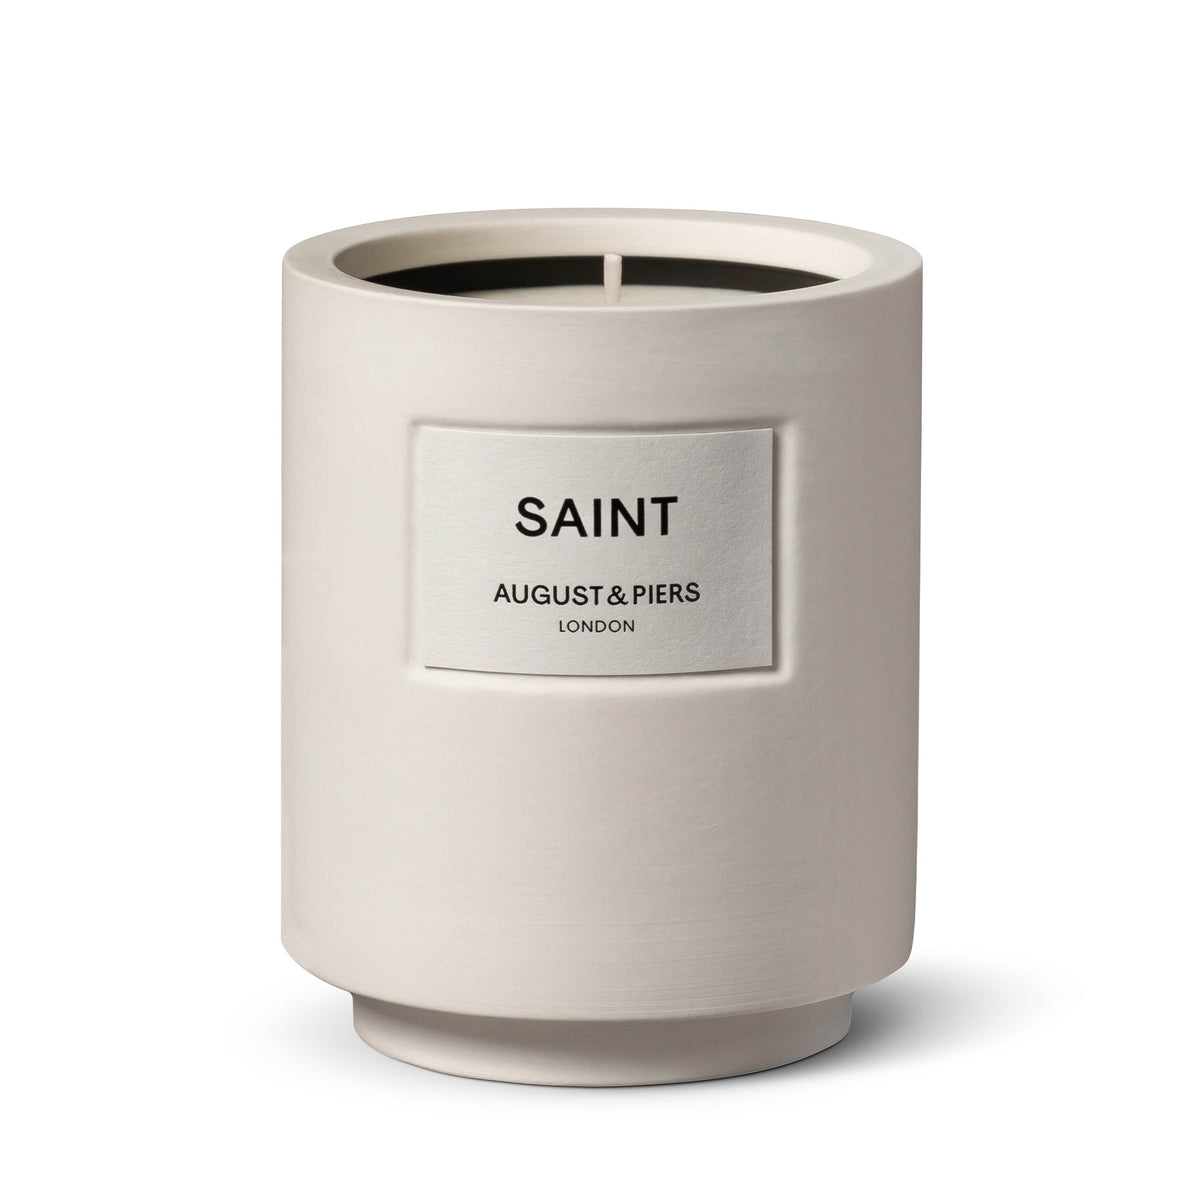 August & Piers Saint Scented Candle